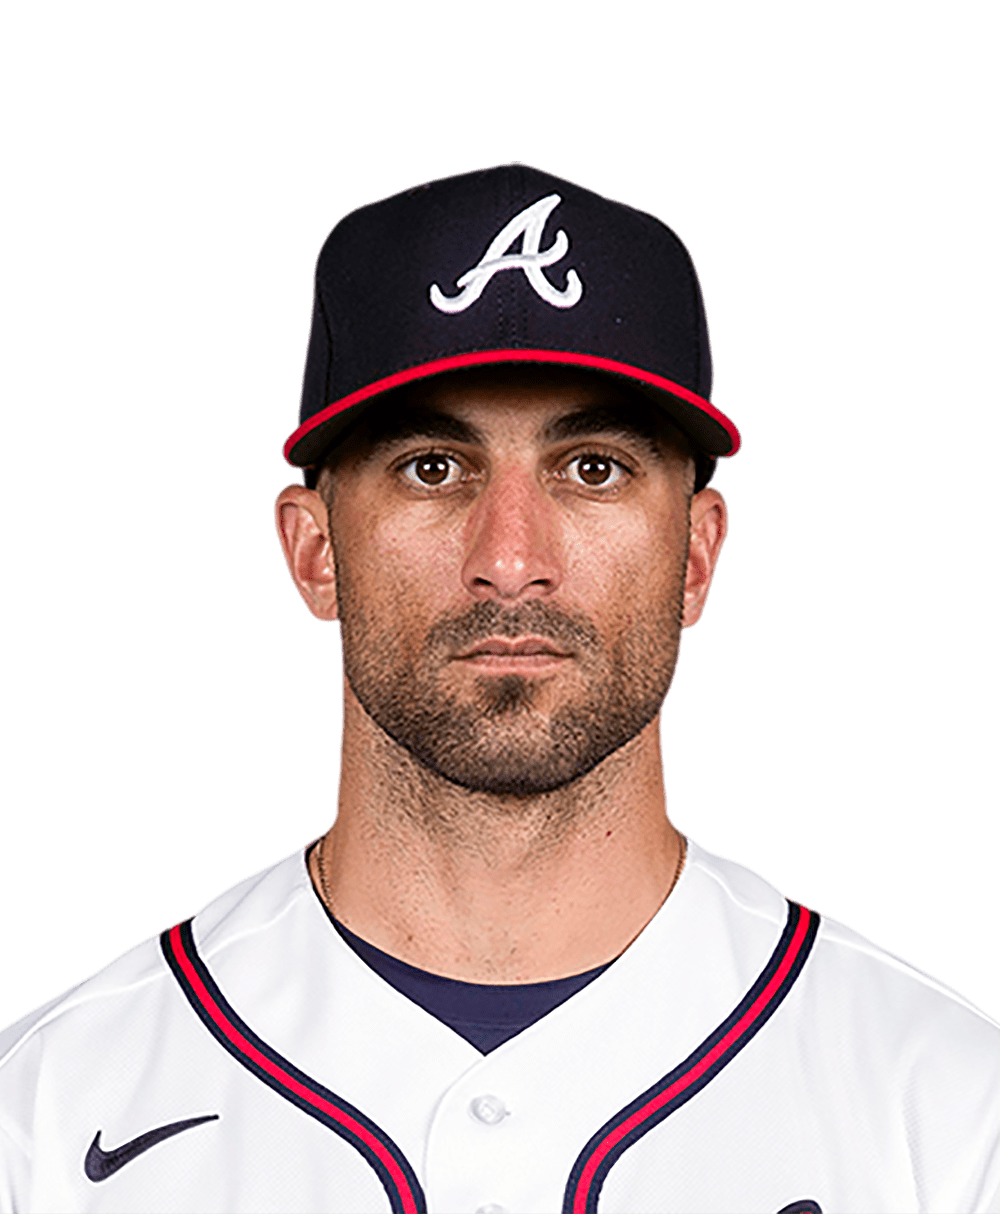 Nick Markakis retires after 15 MLB seasons with Orioles, Braves